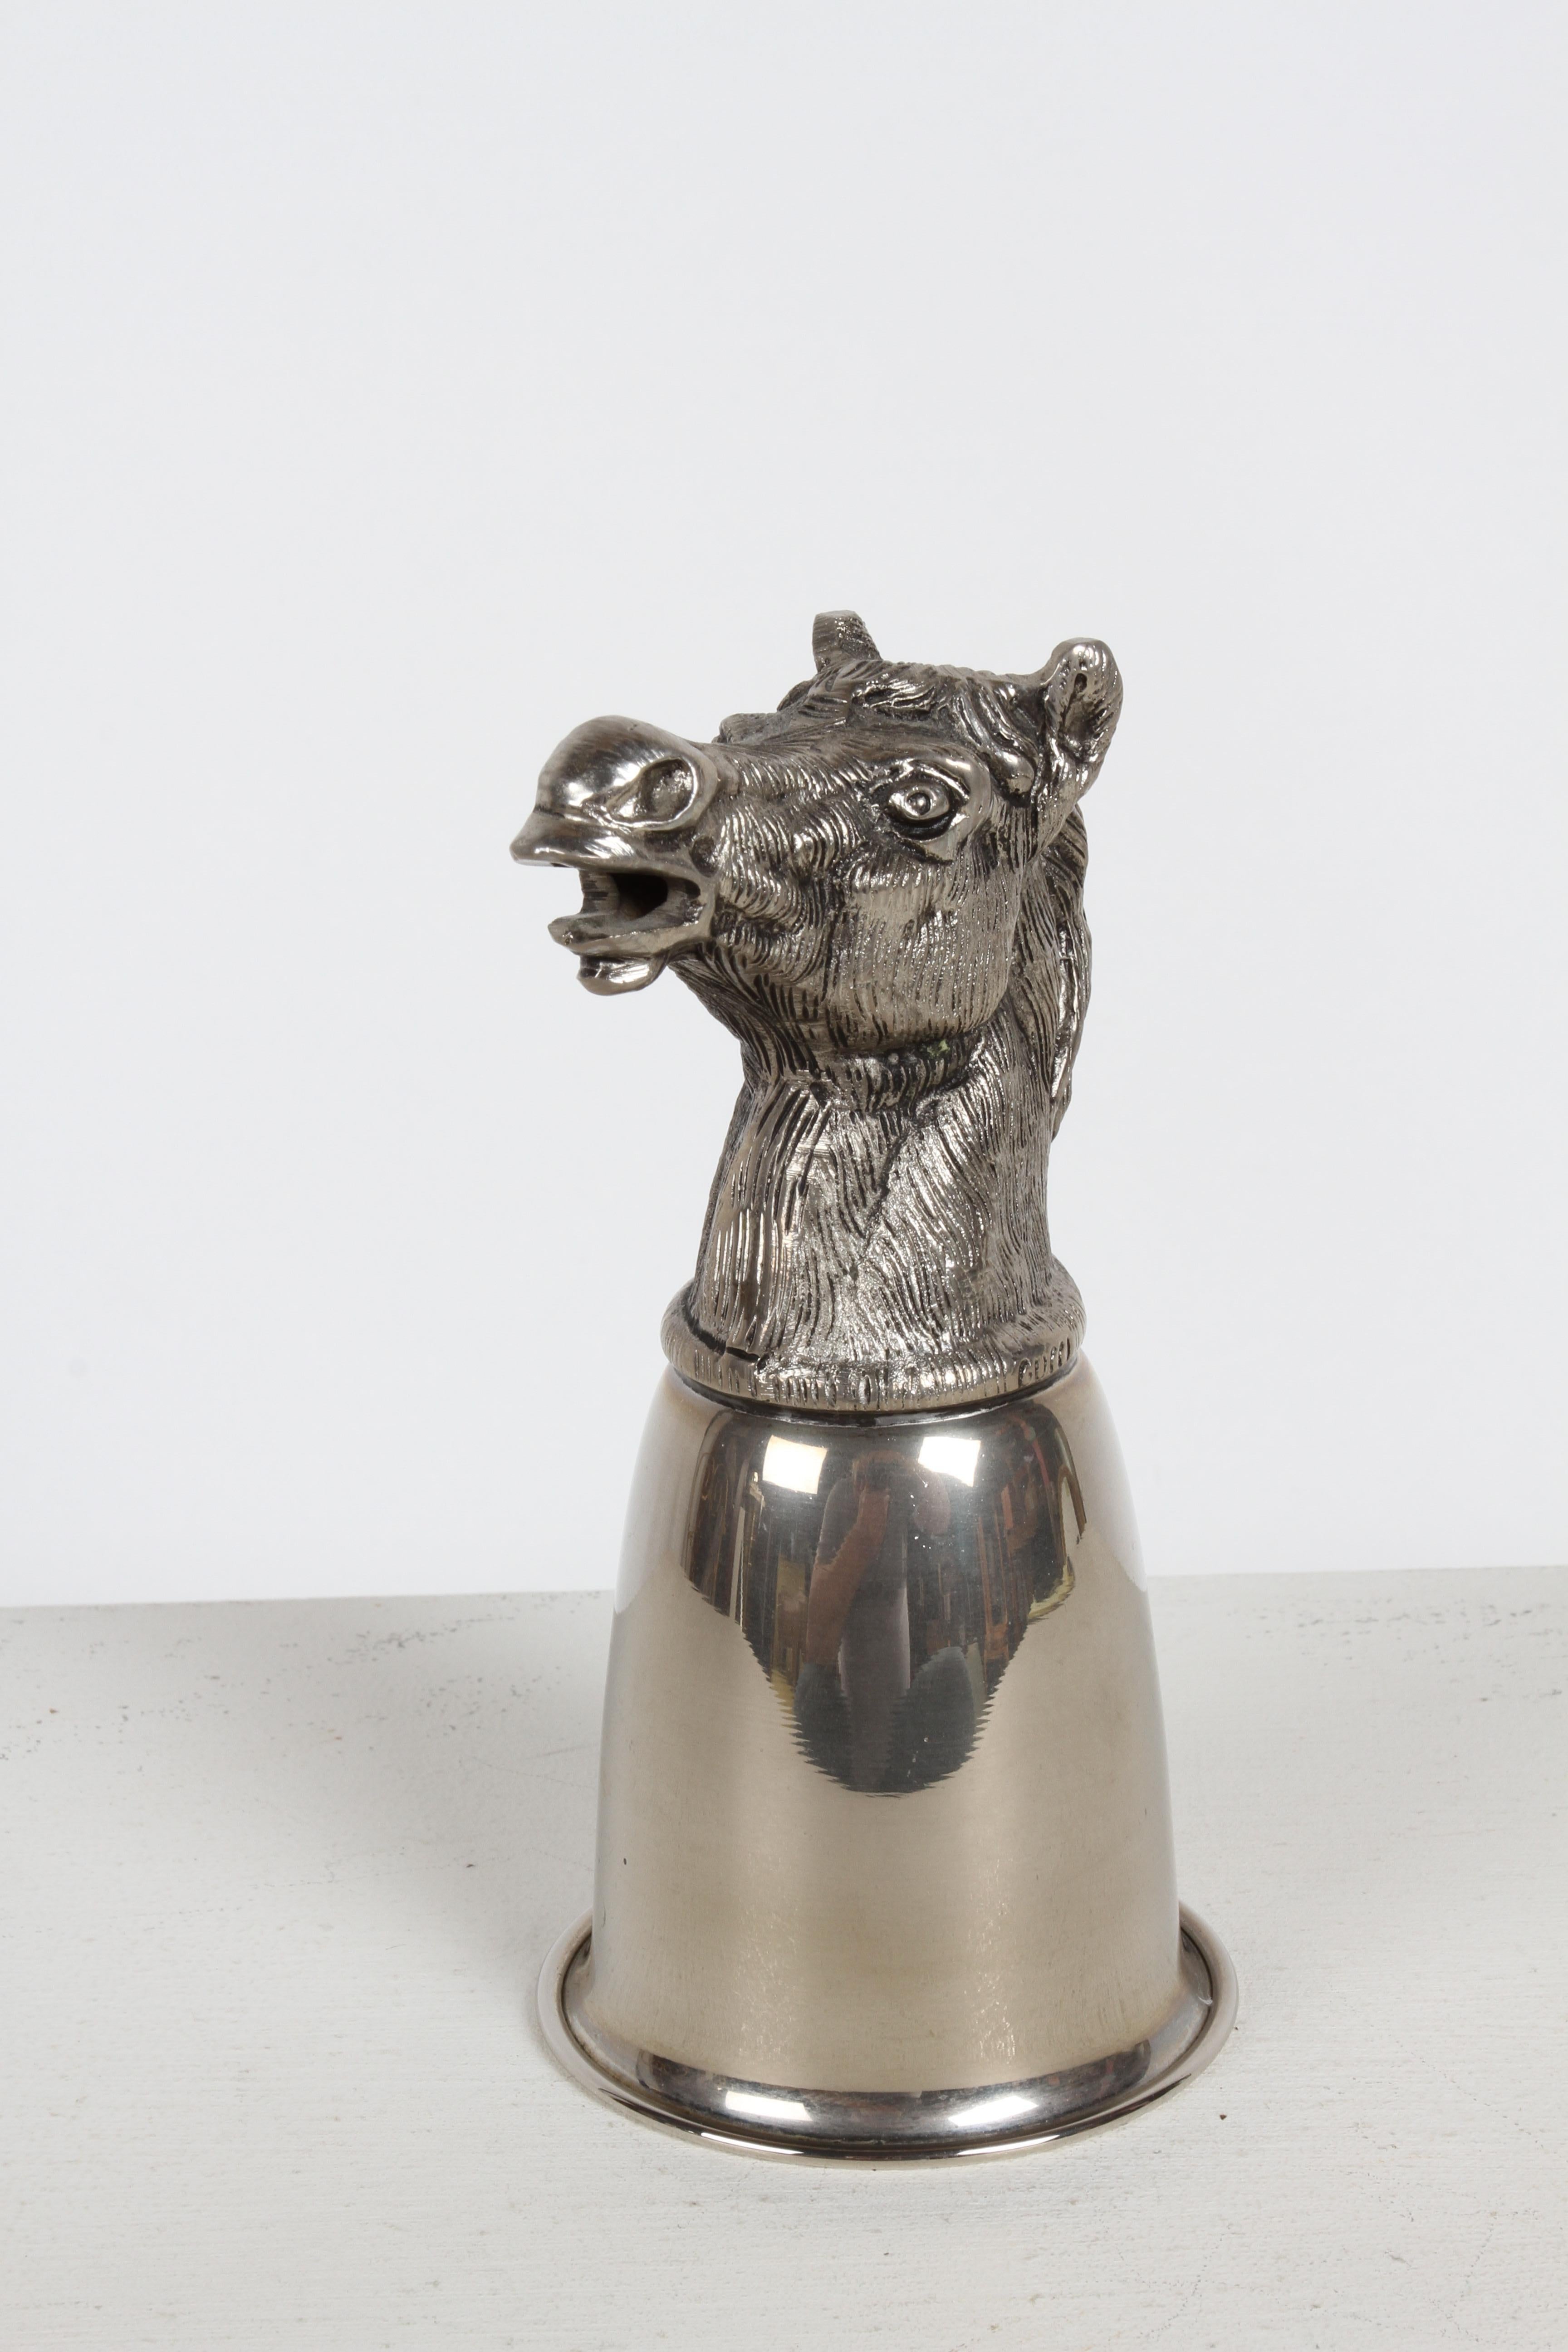 Circa 1970s Hallmarked Gucci - Italy Silver-Plated Horse Head hunting Equestrian Stirrup Cup. 
This drinking / vessel cup can rest on the head or be displayed turned over with the head clearly visible, as a trophy / sculpture piece on your bar. In